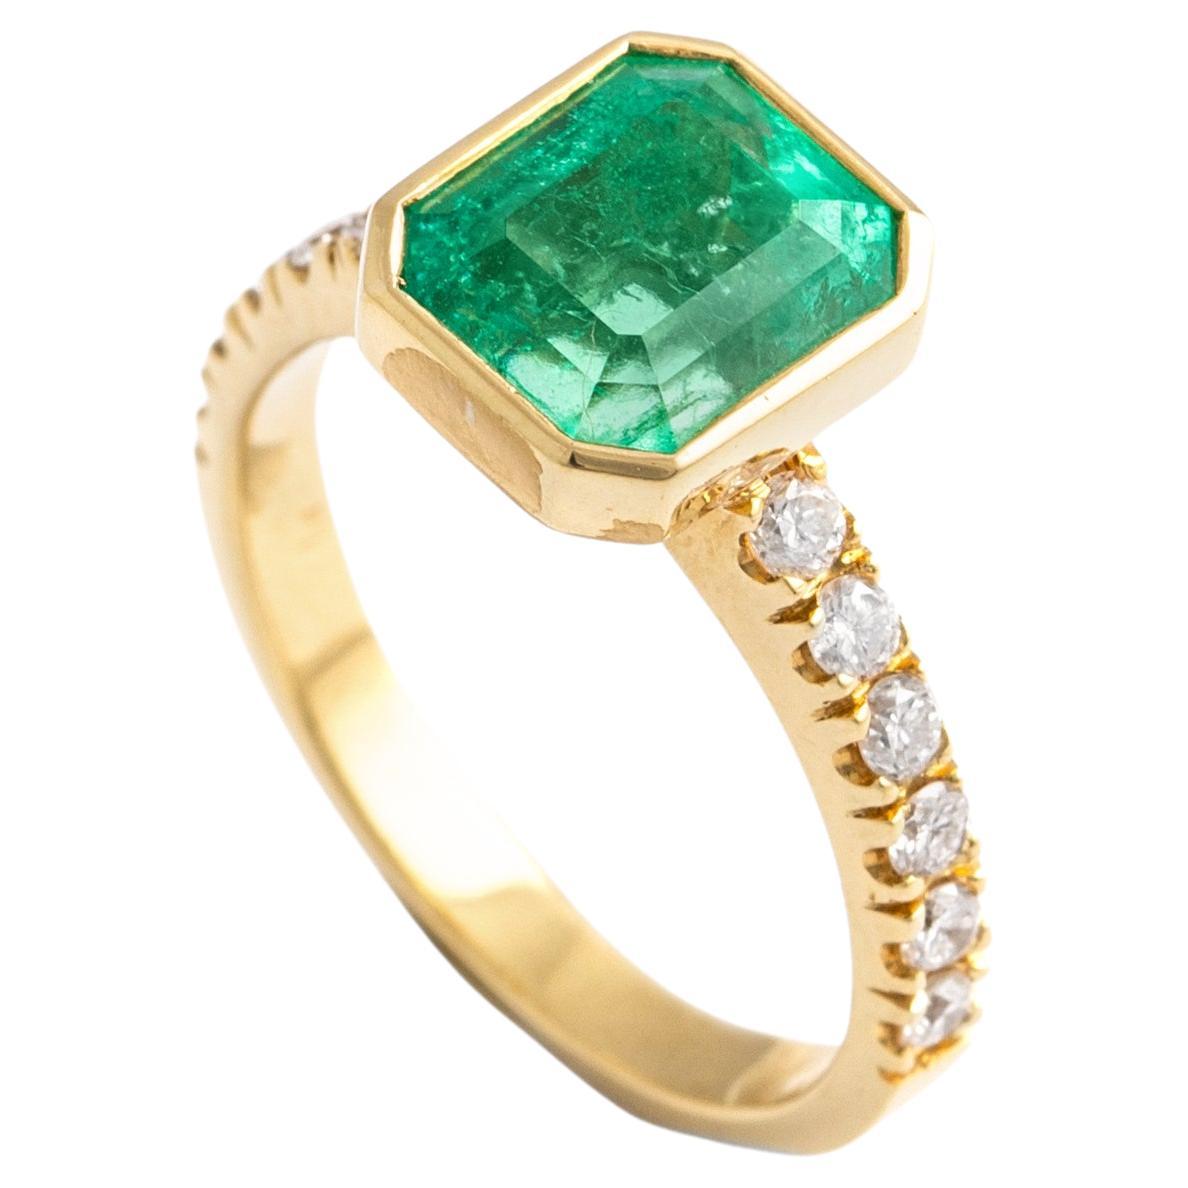 3.09 Carat Colombian Emerald Ring